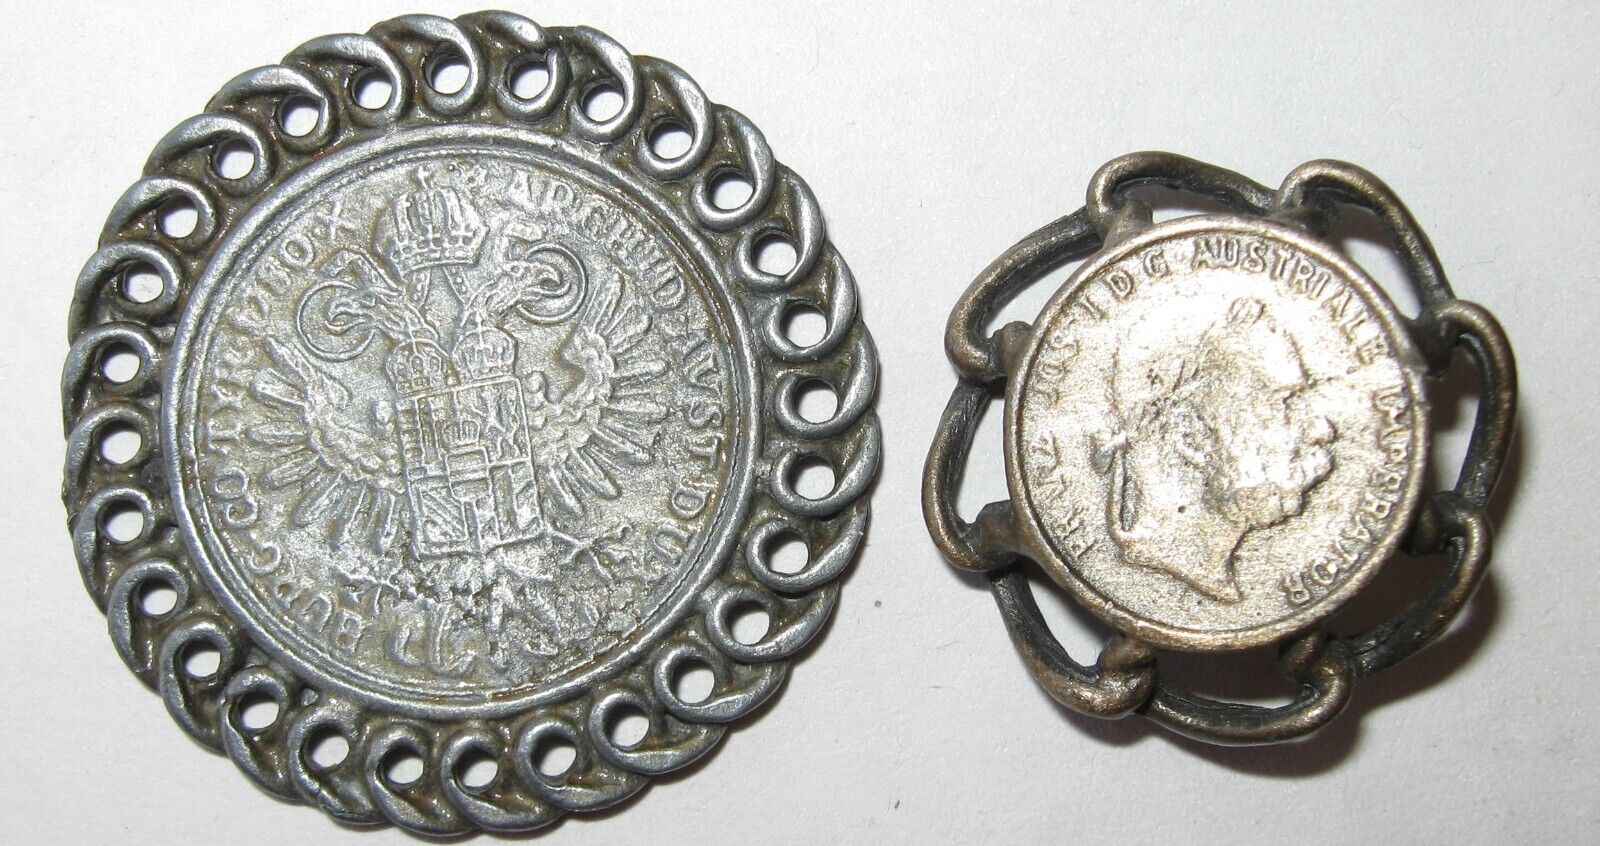 2 Vintage Metal Buttons Marked LIDZ Coin Like with Open Work Borders